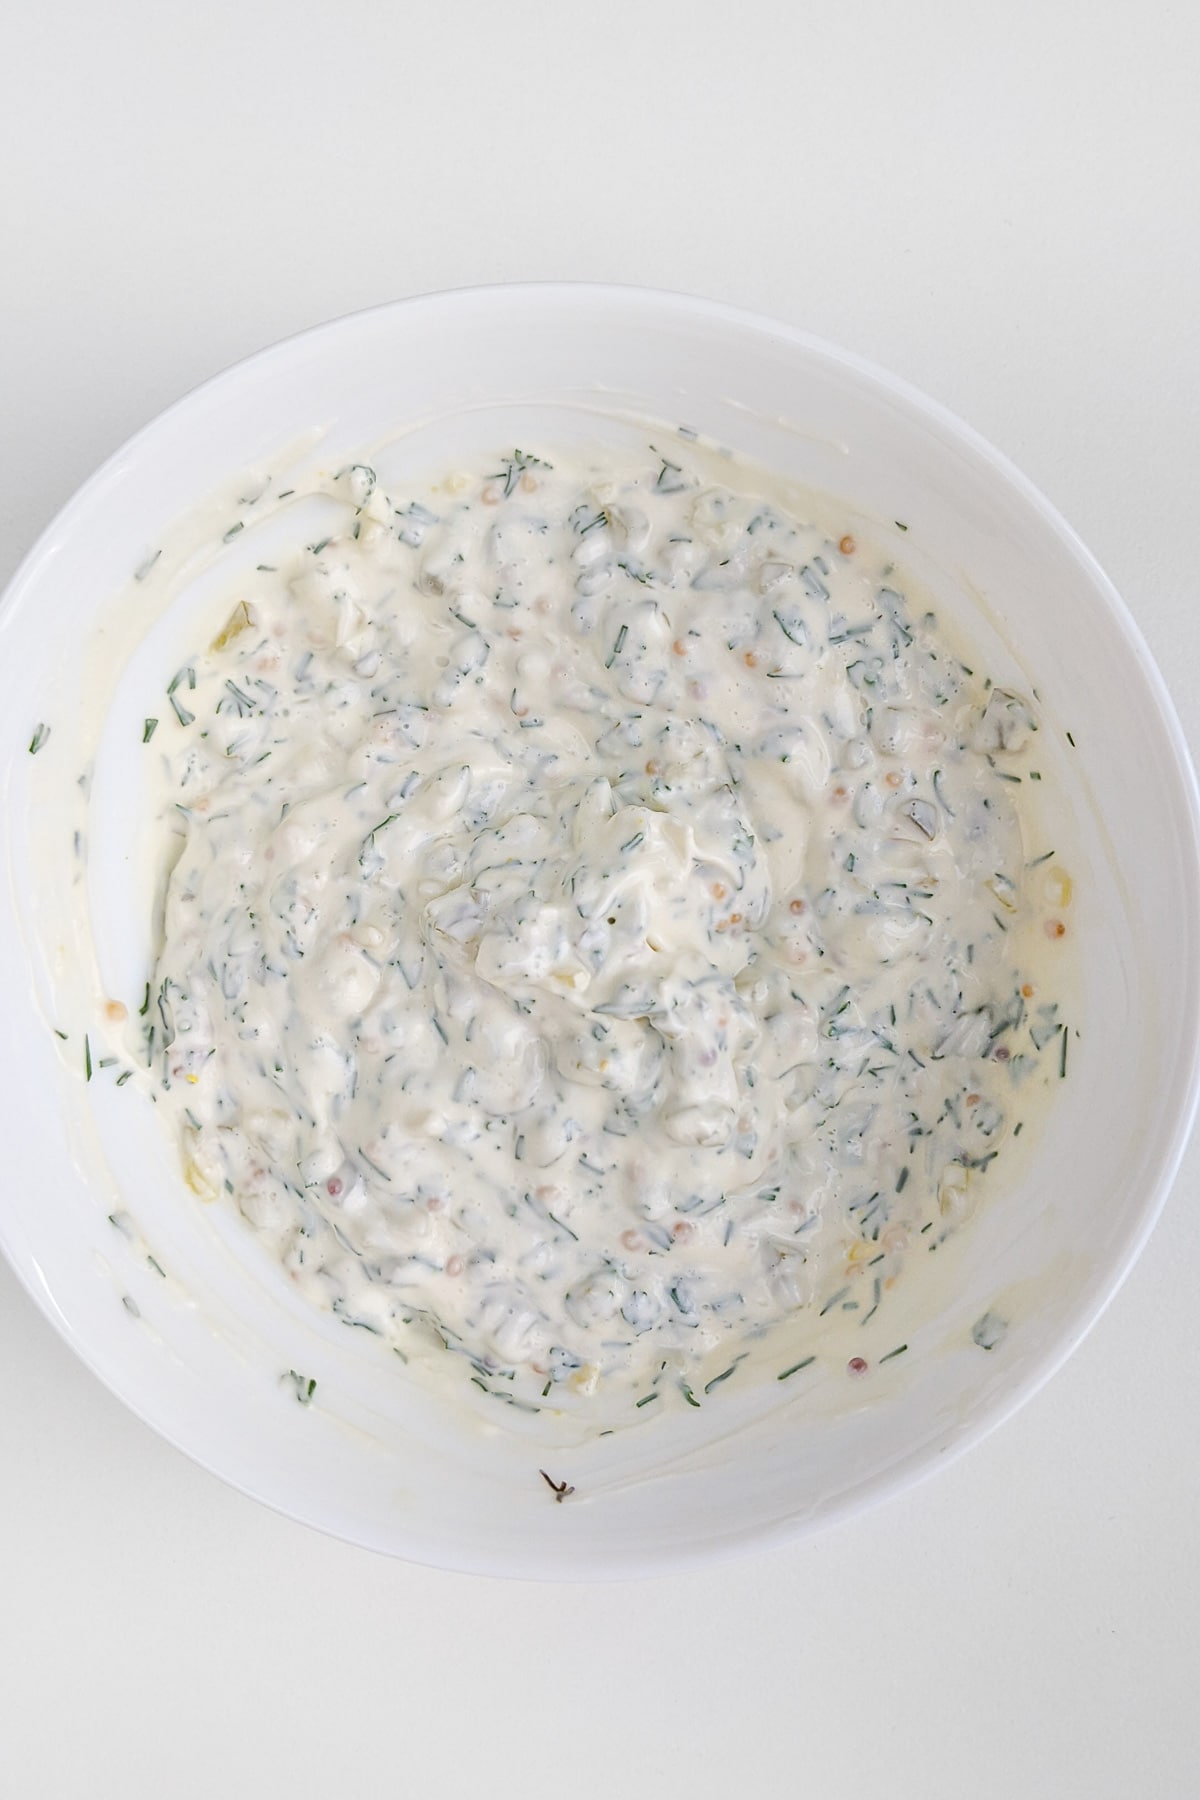 Top view of white plate with mixed homemade tartar sauce.